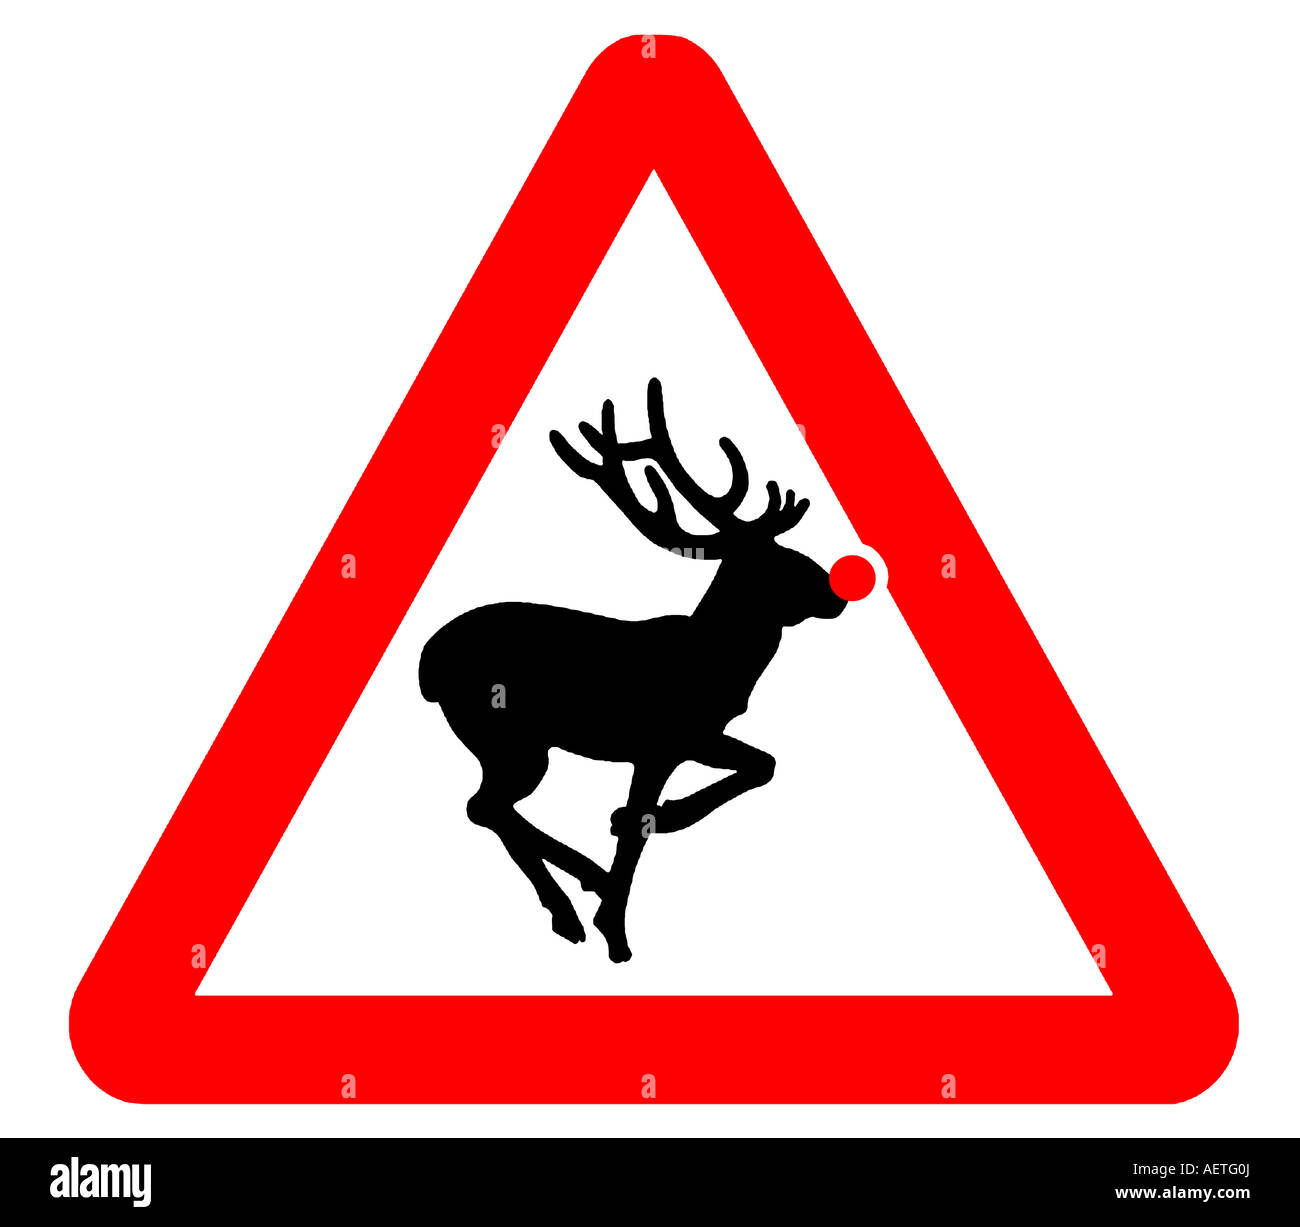 Rudolph the red nosed reindeer sign Stock Photo